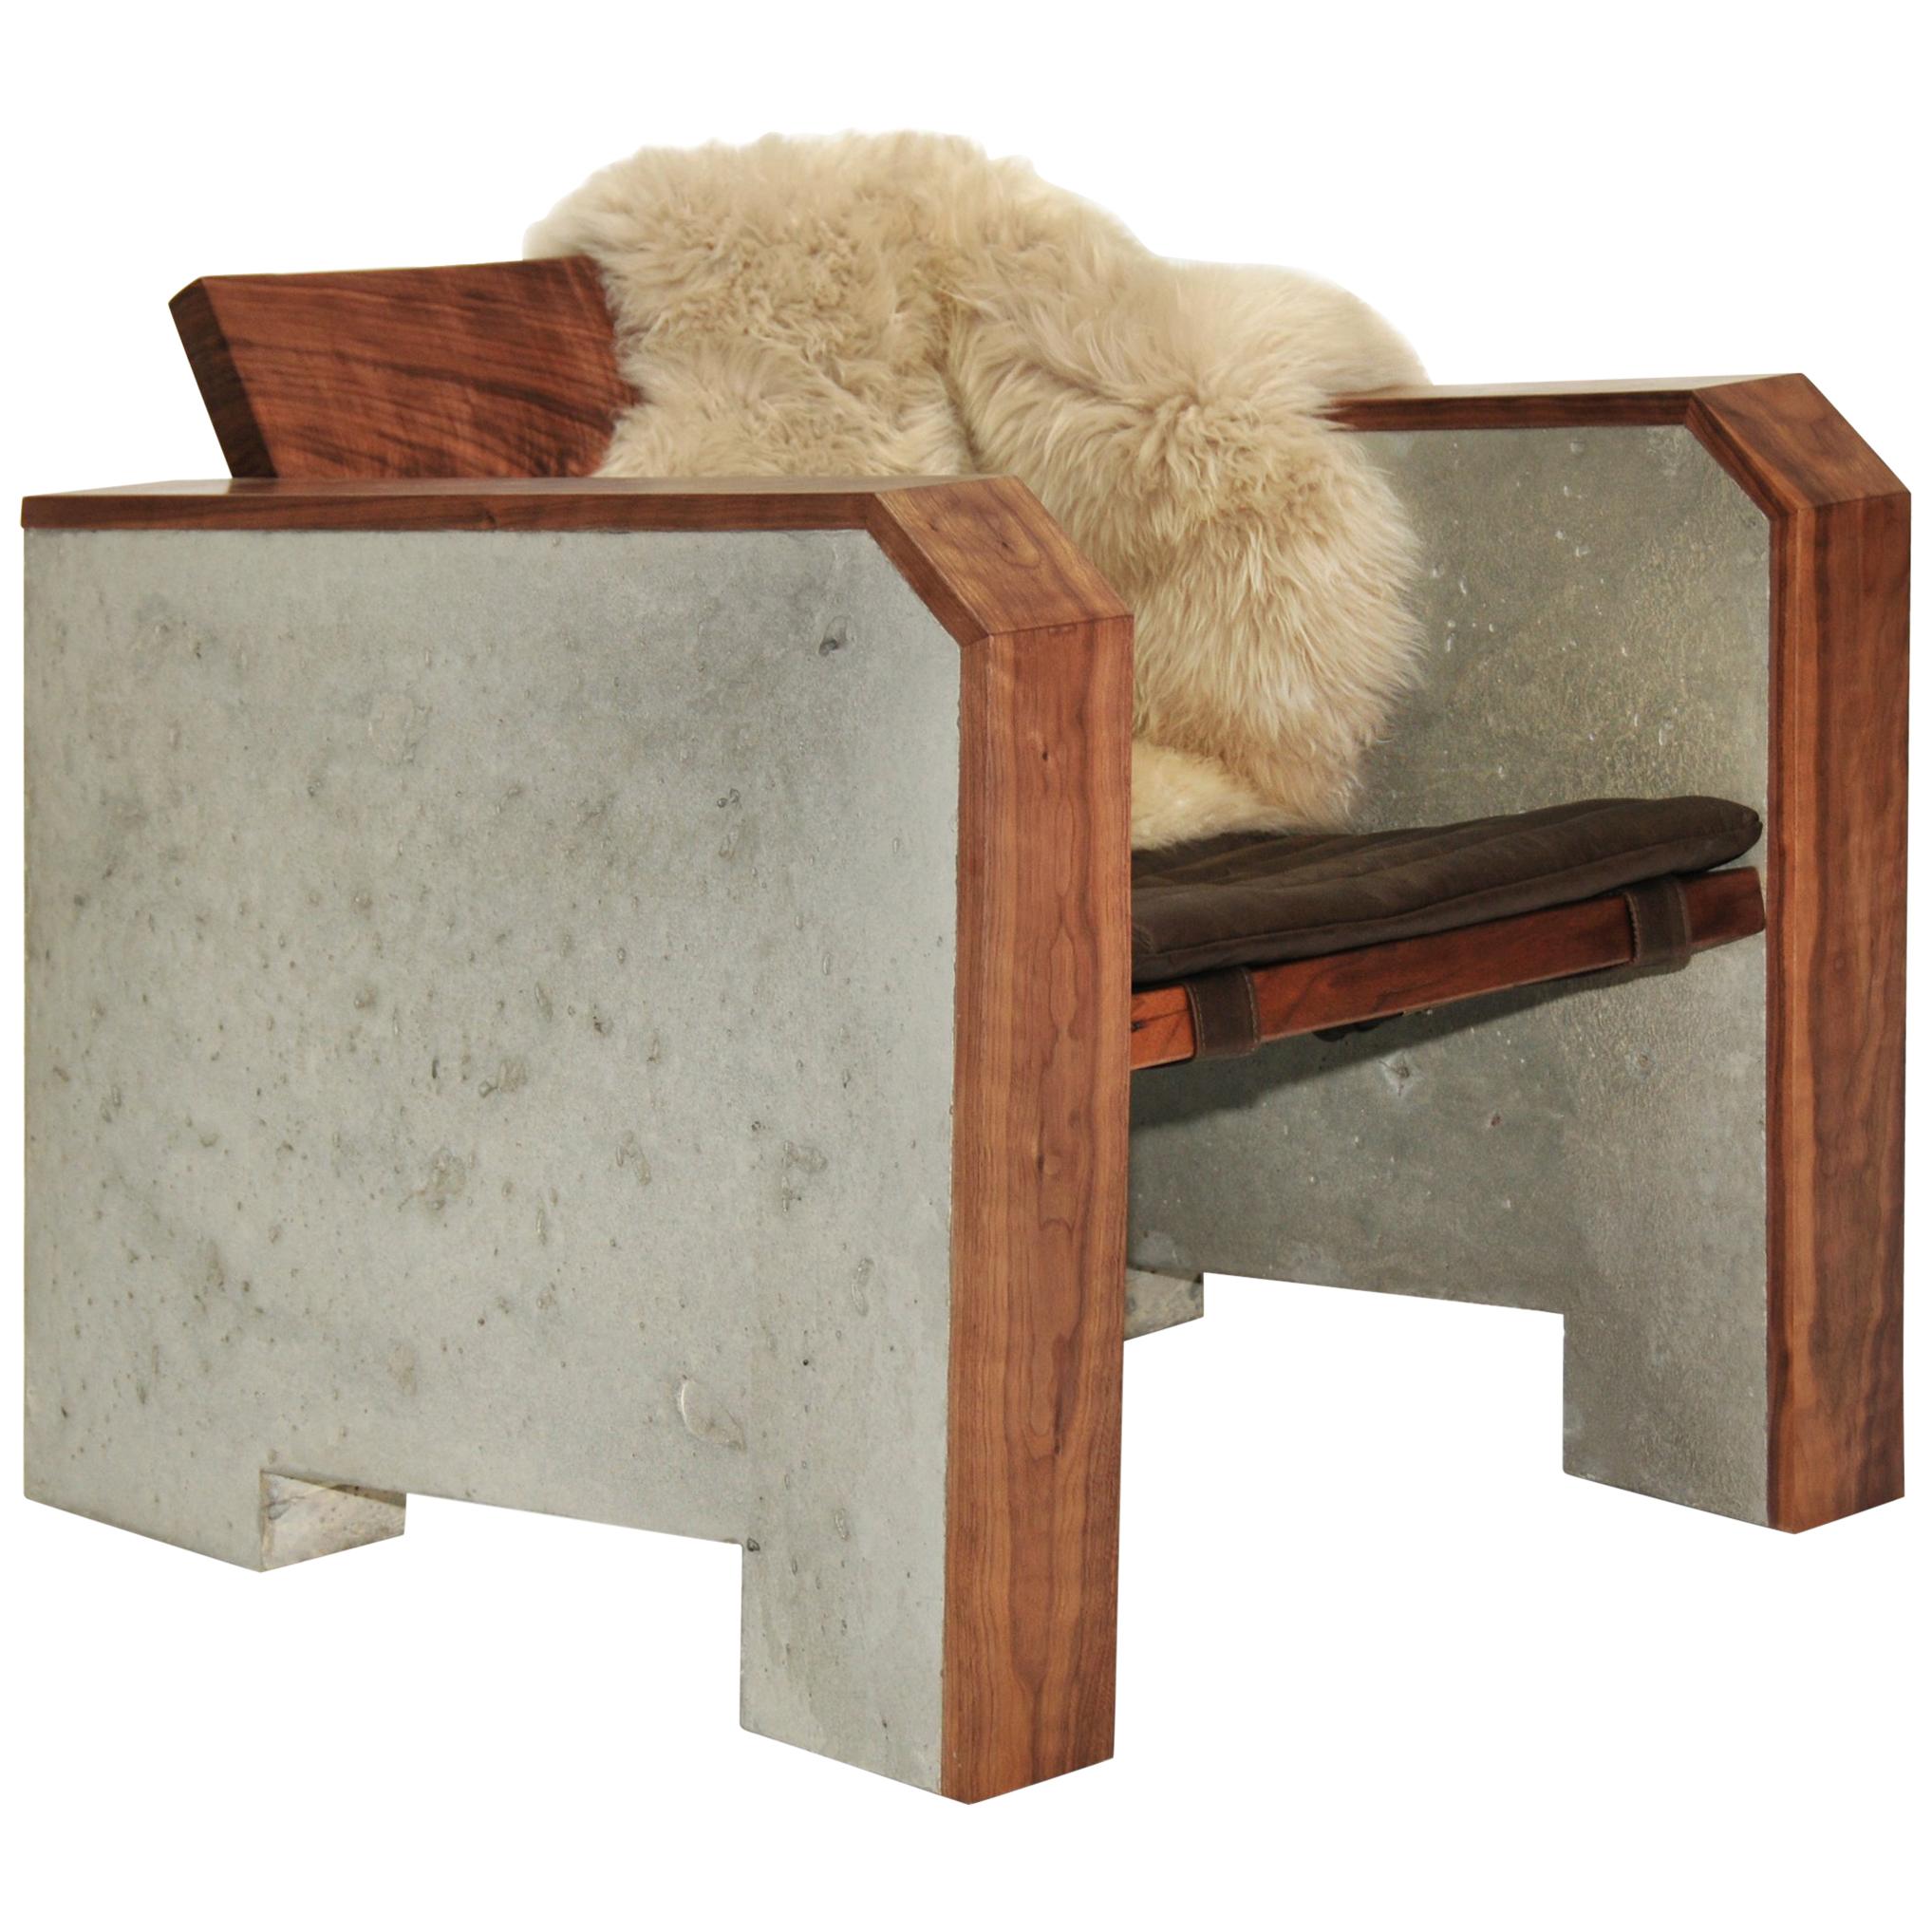 Brutalist Walnut & Concrete Lounge Chair with Sheepskin Throw & Leather Cushion For Sale